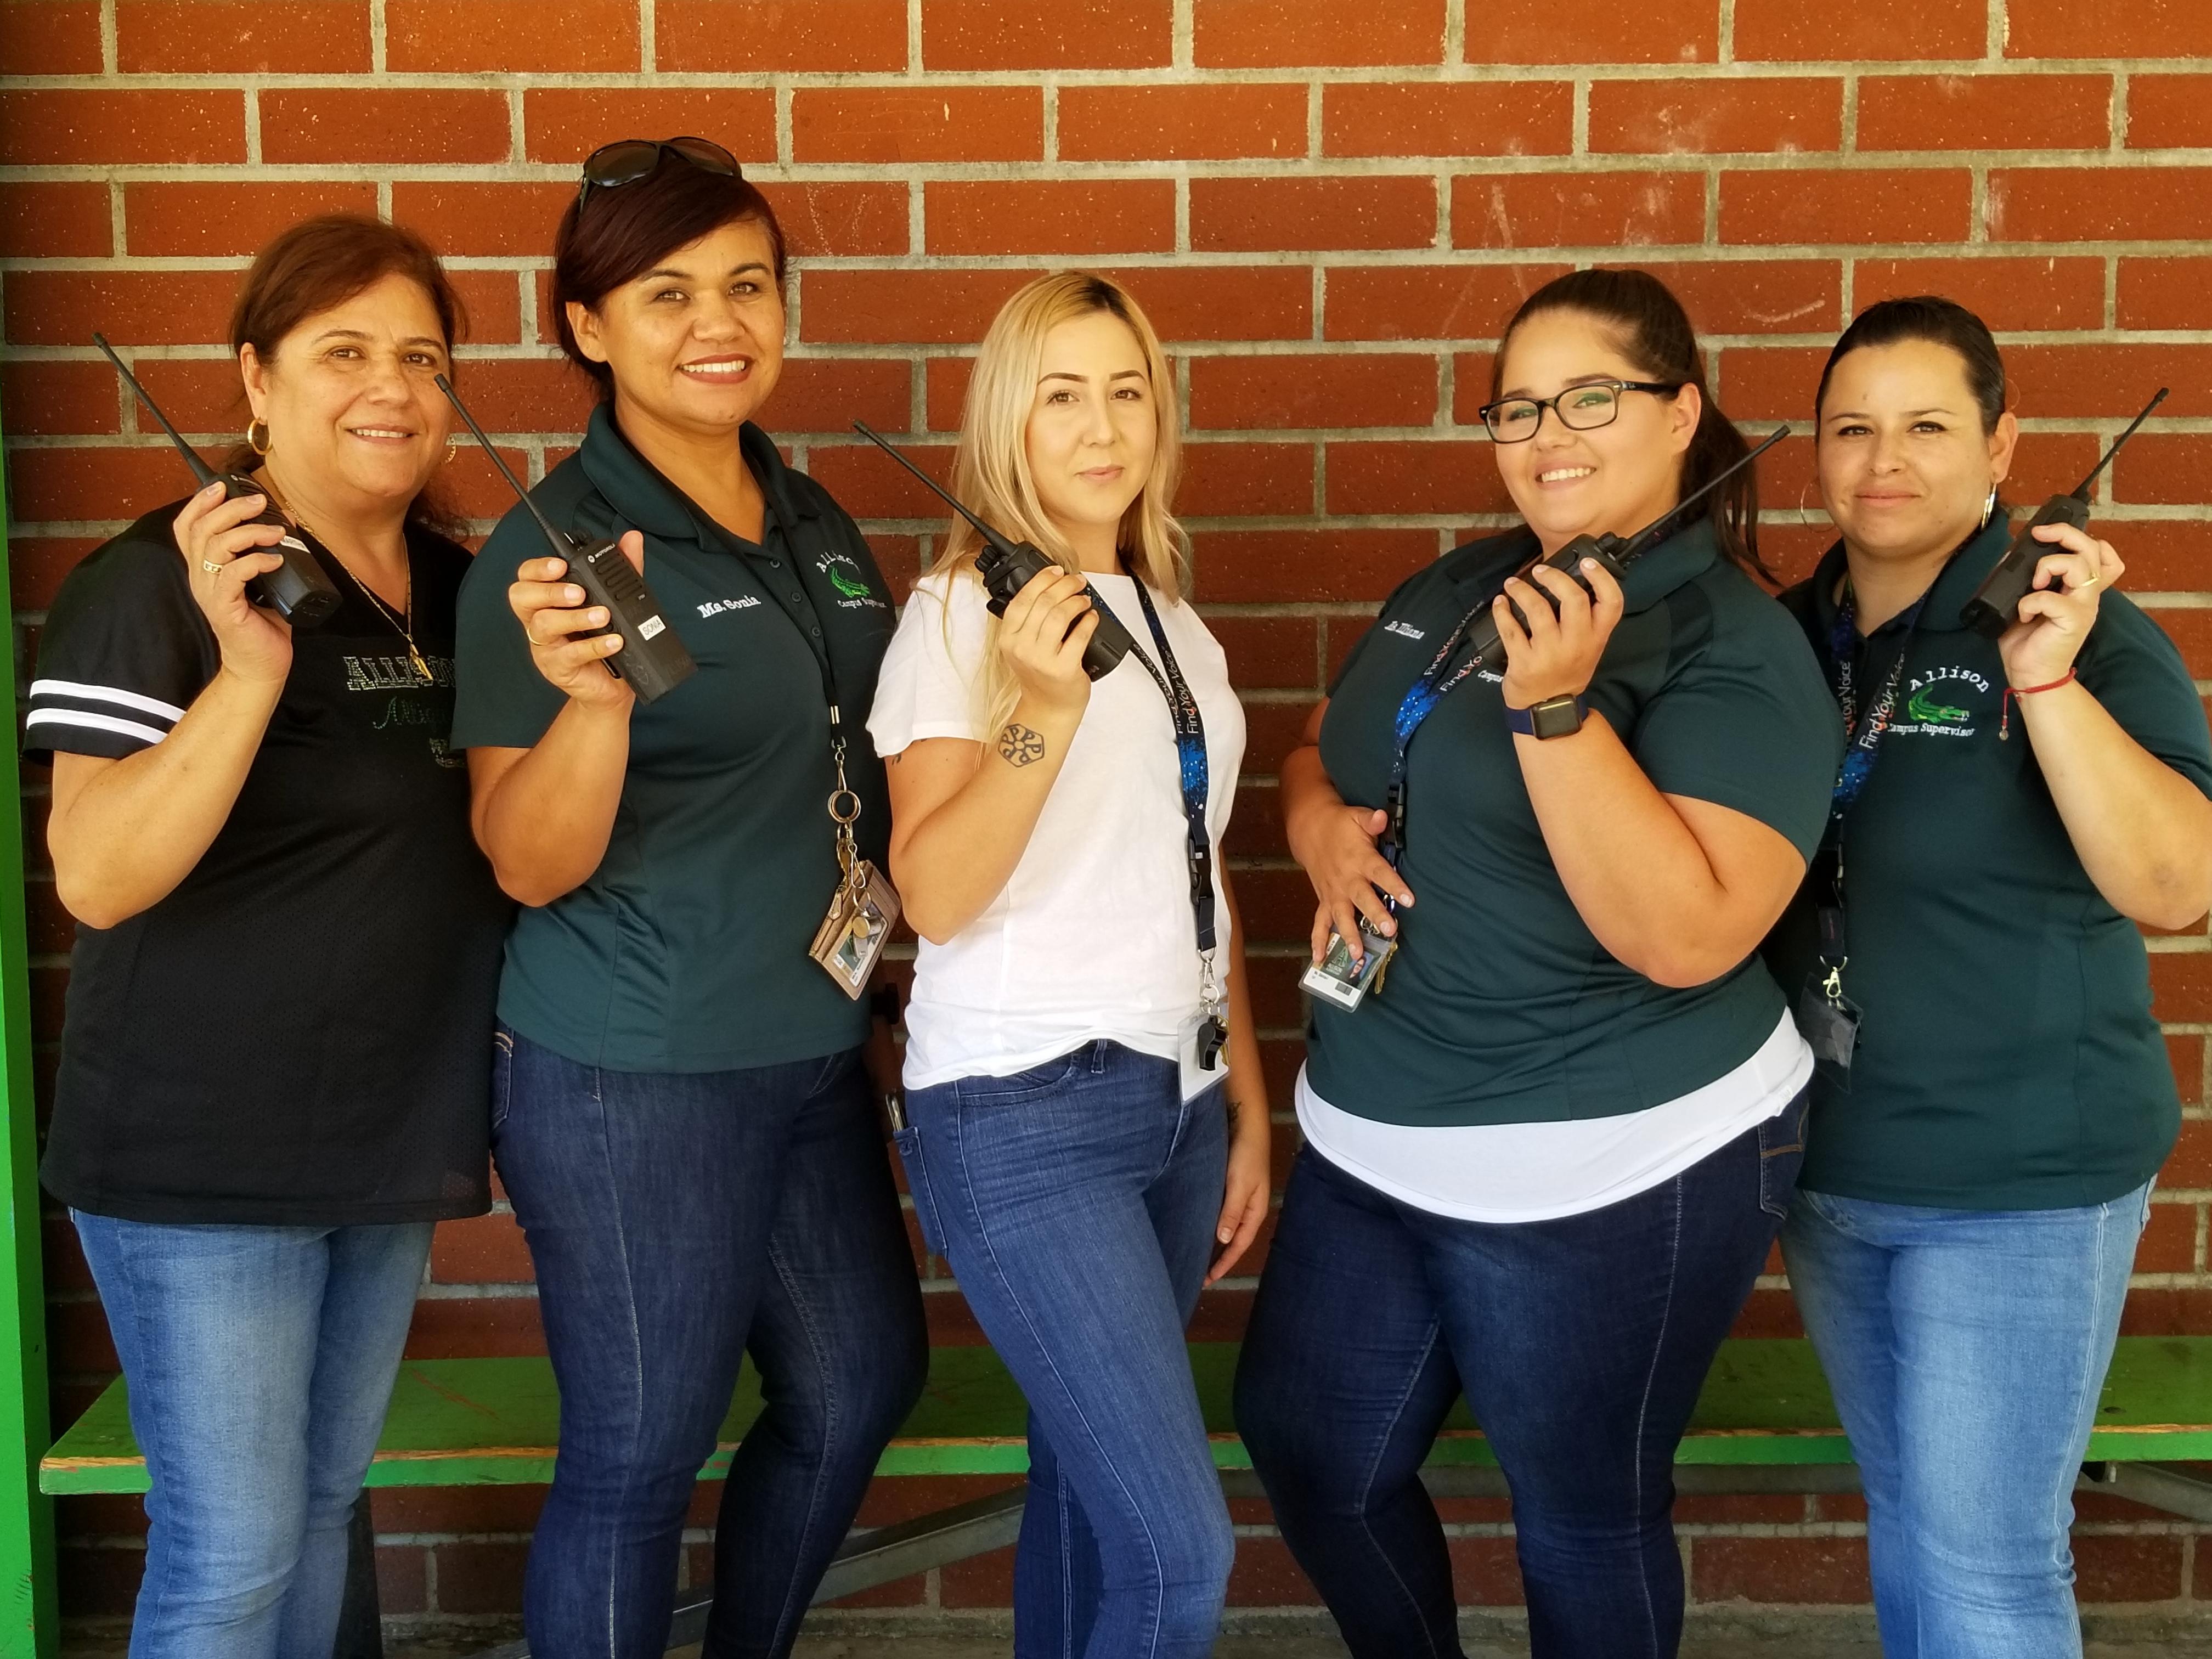 The best team of Campus Supervisors in PUSD live at Allison. Their job is critical, they make sure our students stay safe! Here they are showcasing their new radios. #proud2bepusd